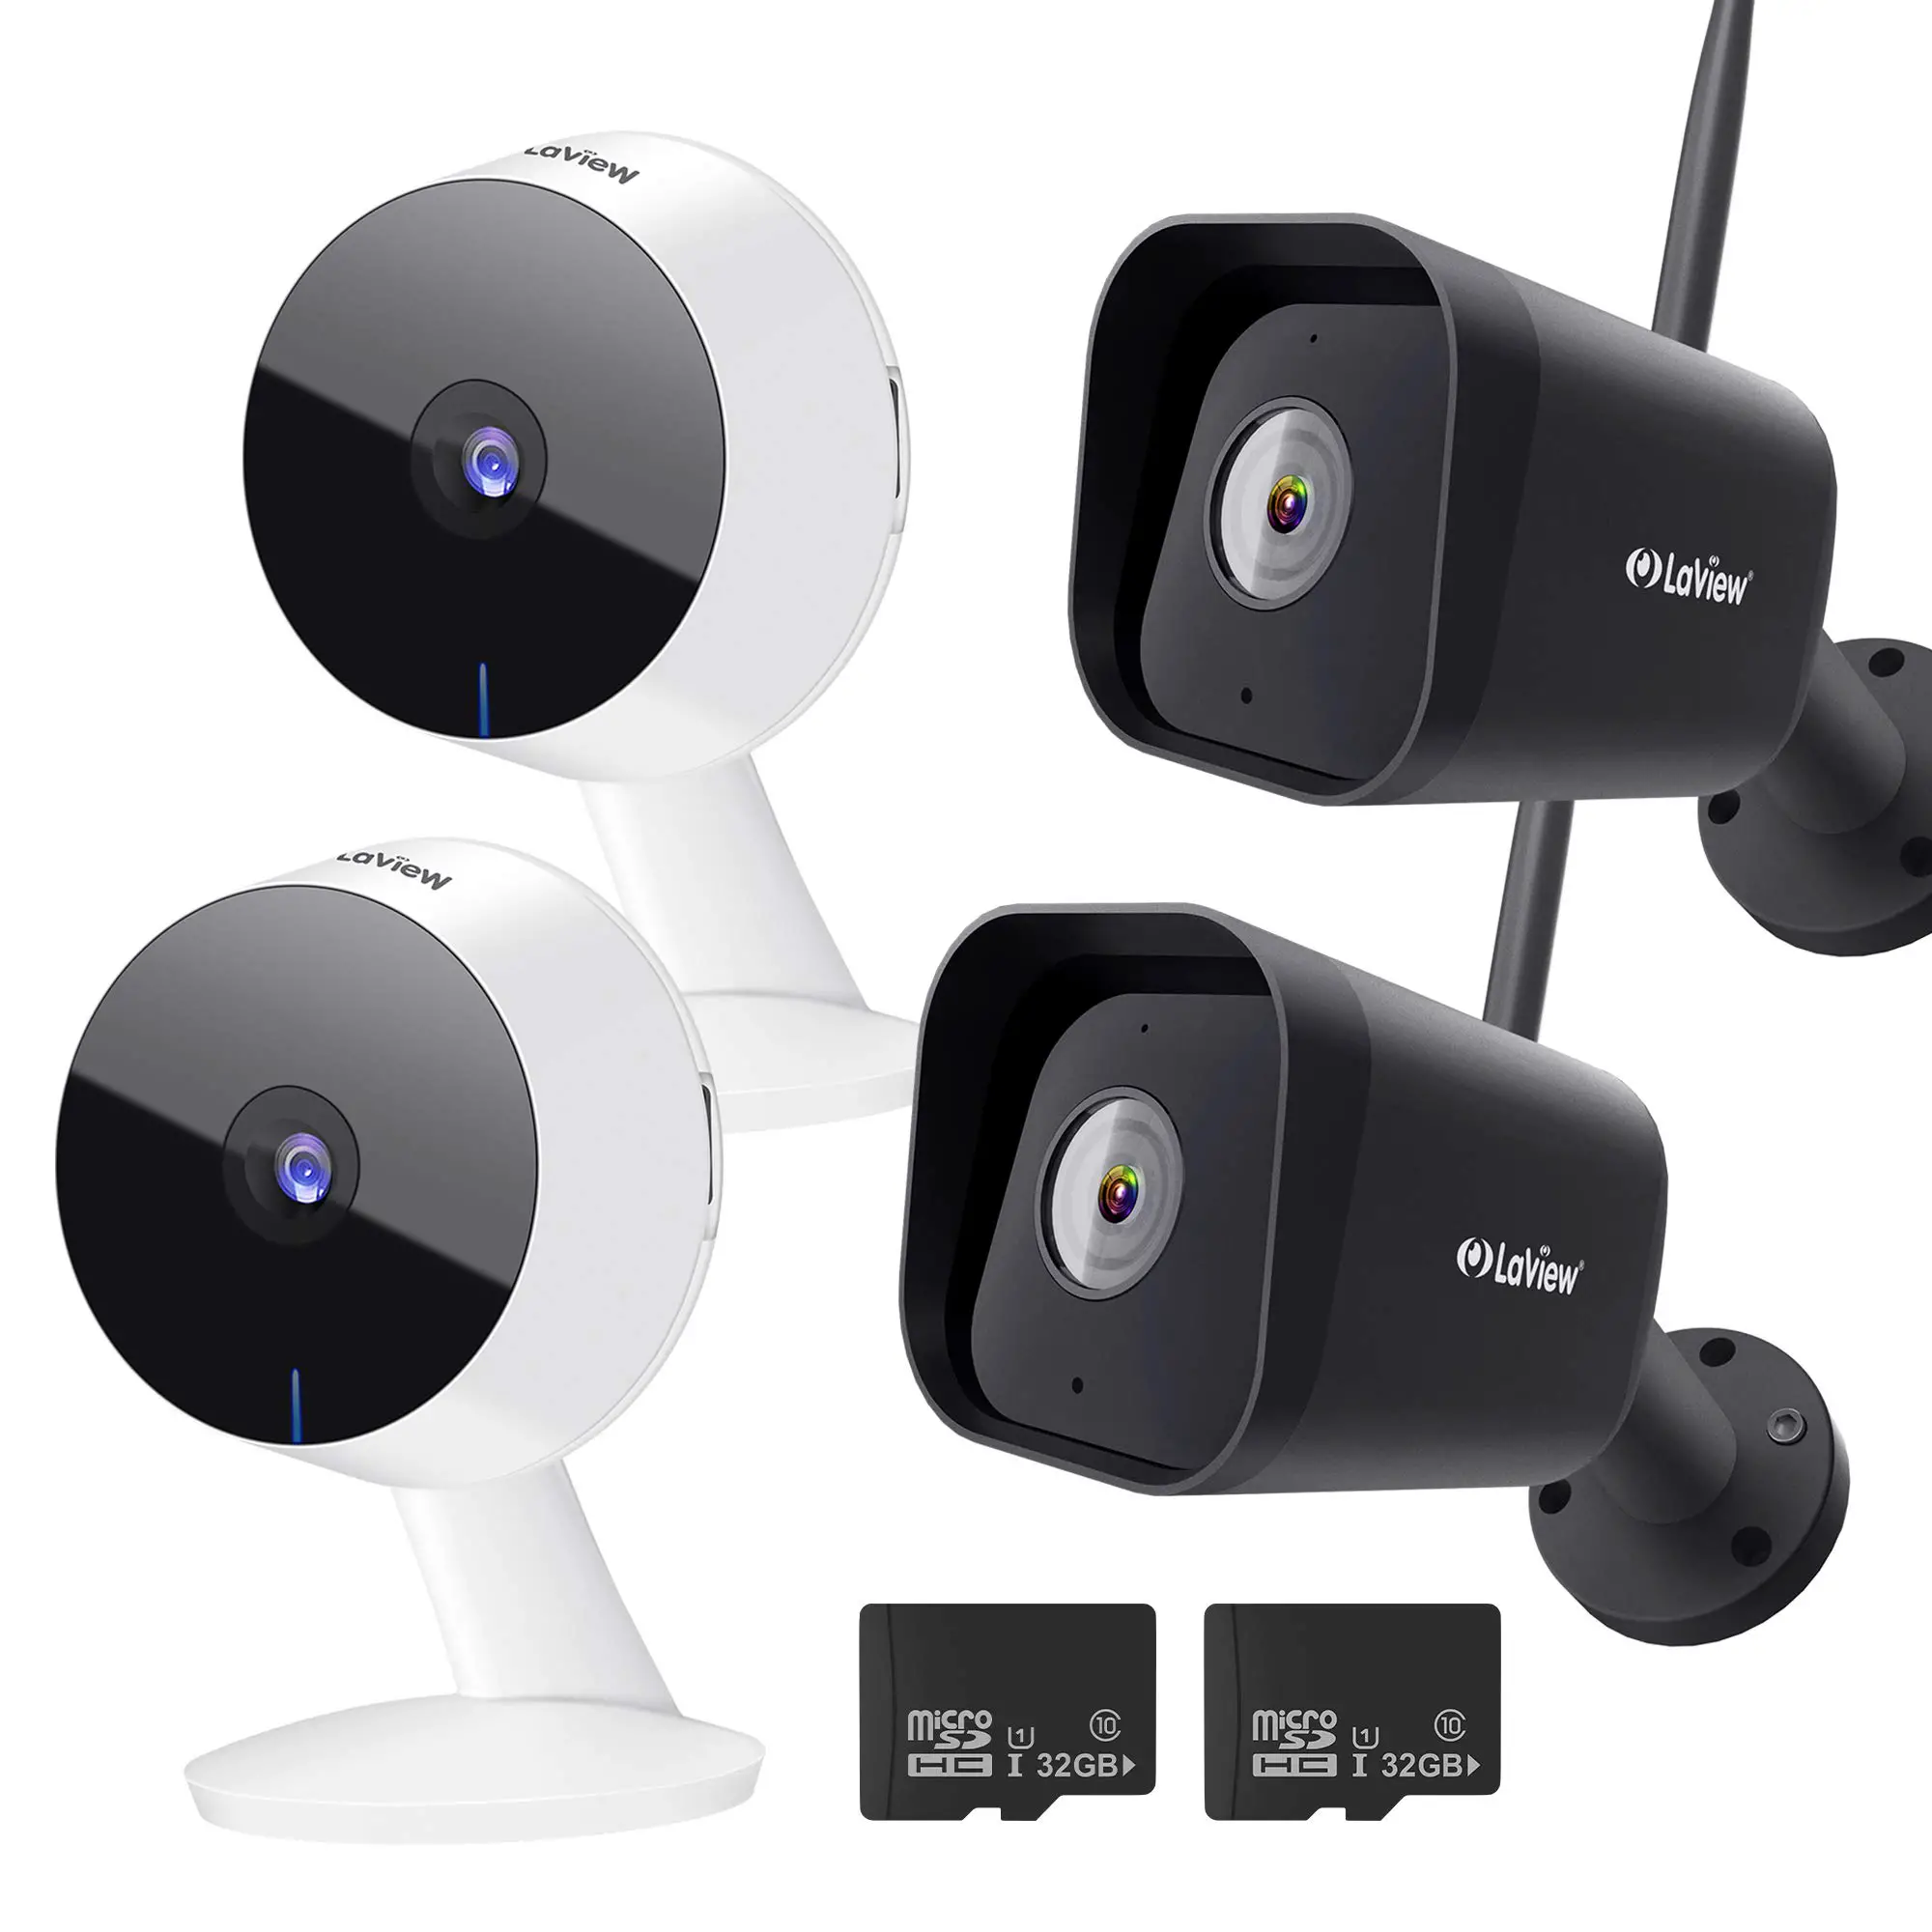 LaView R3 1080p Wireless Security Camera Review! 